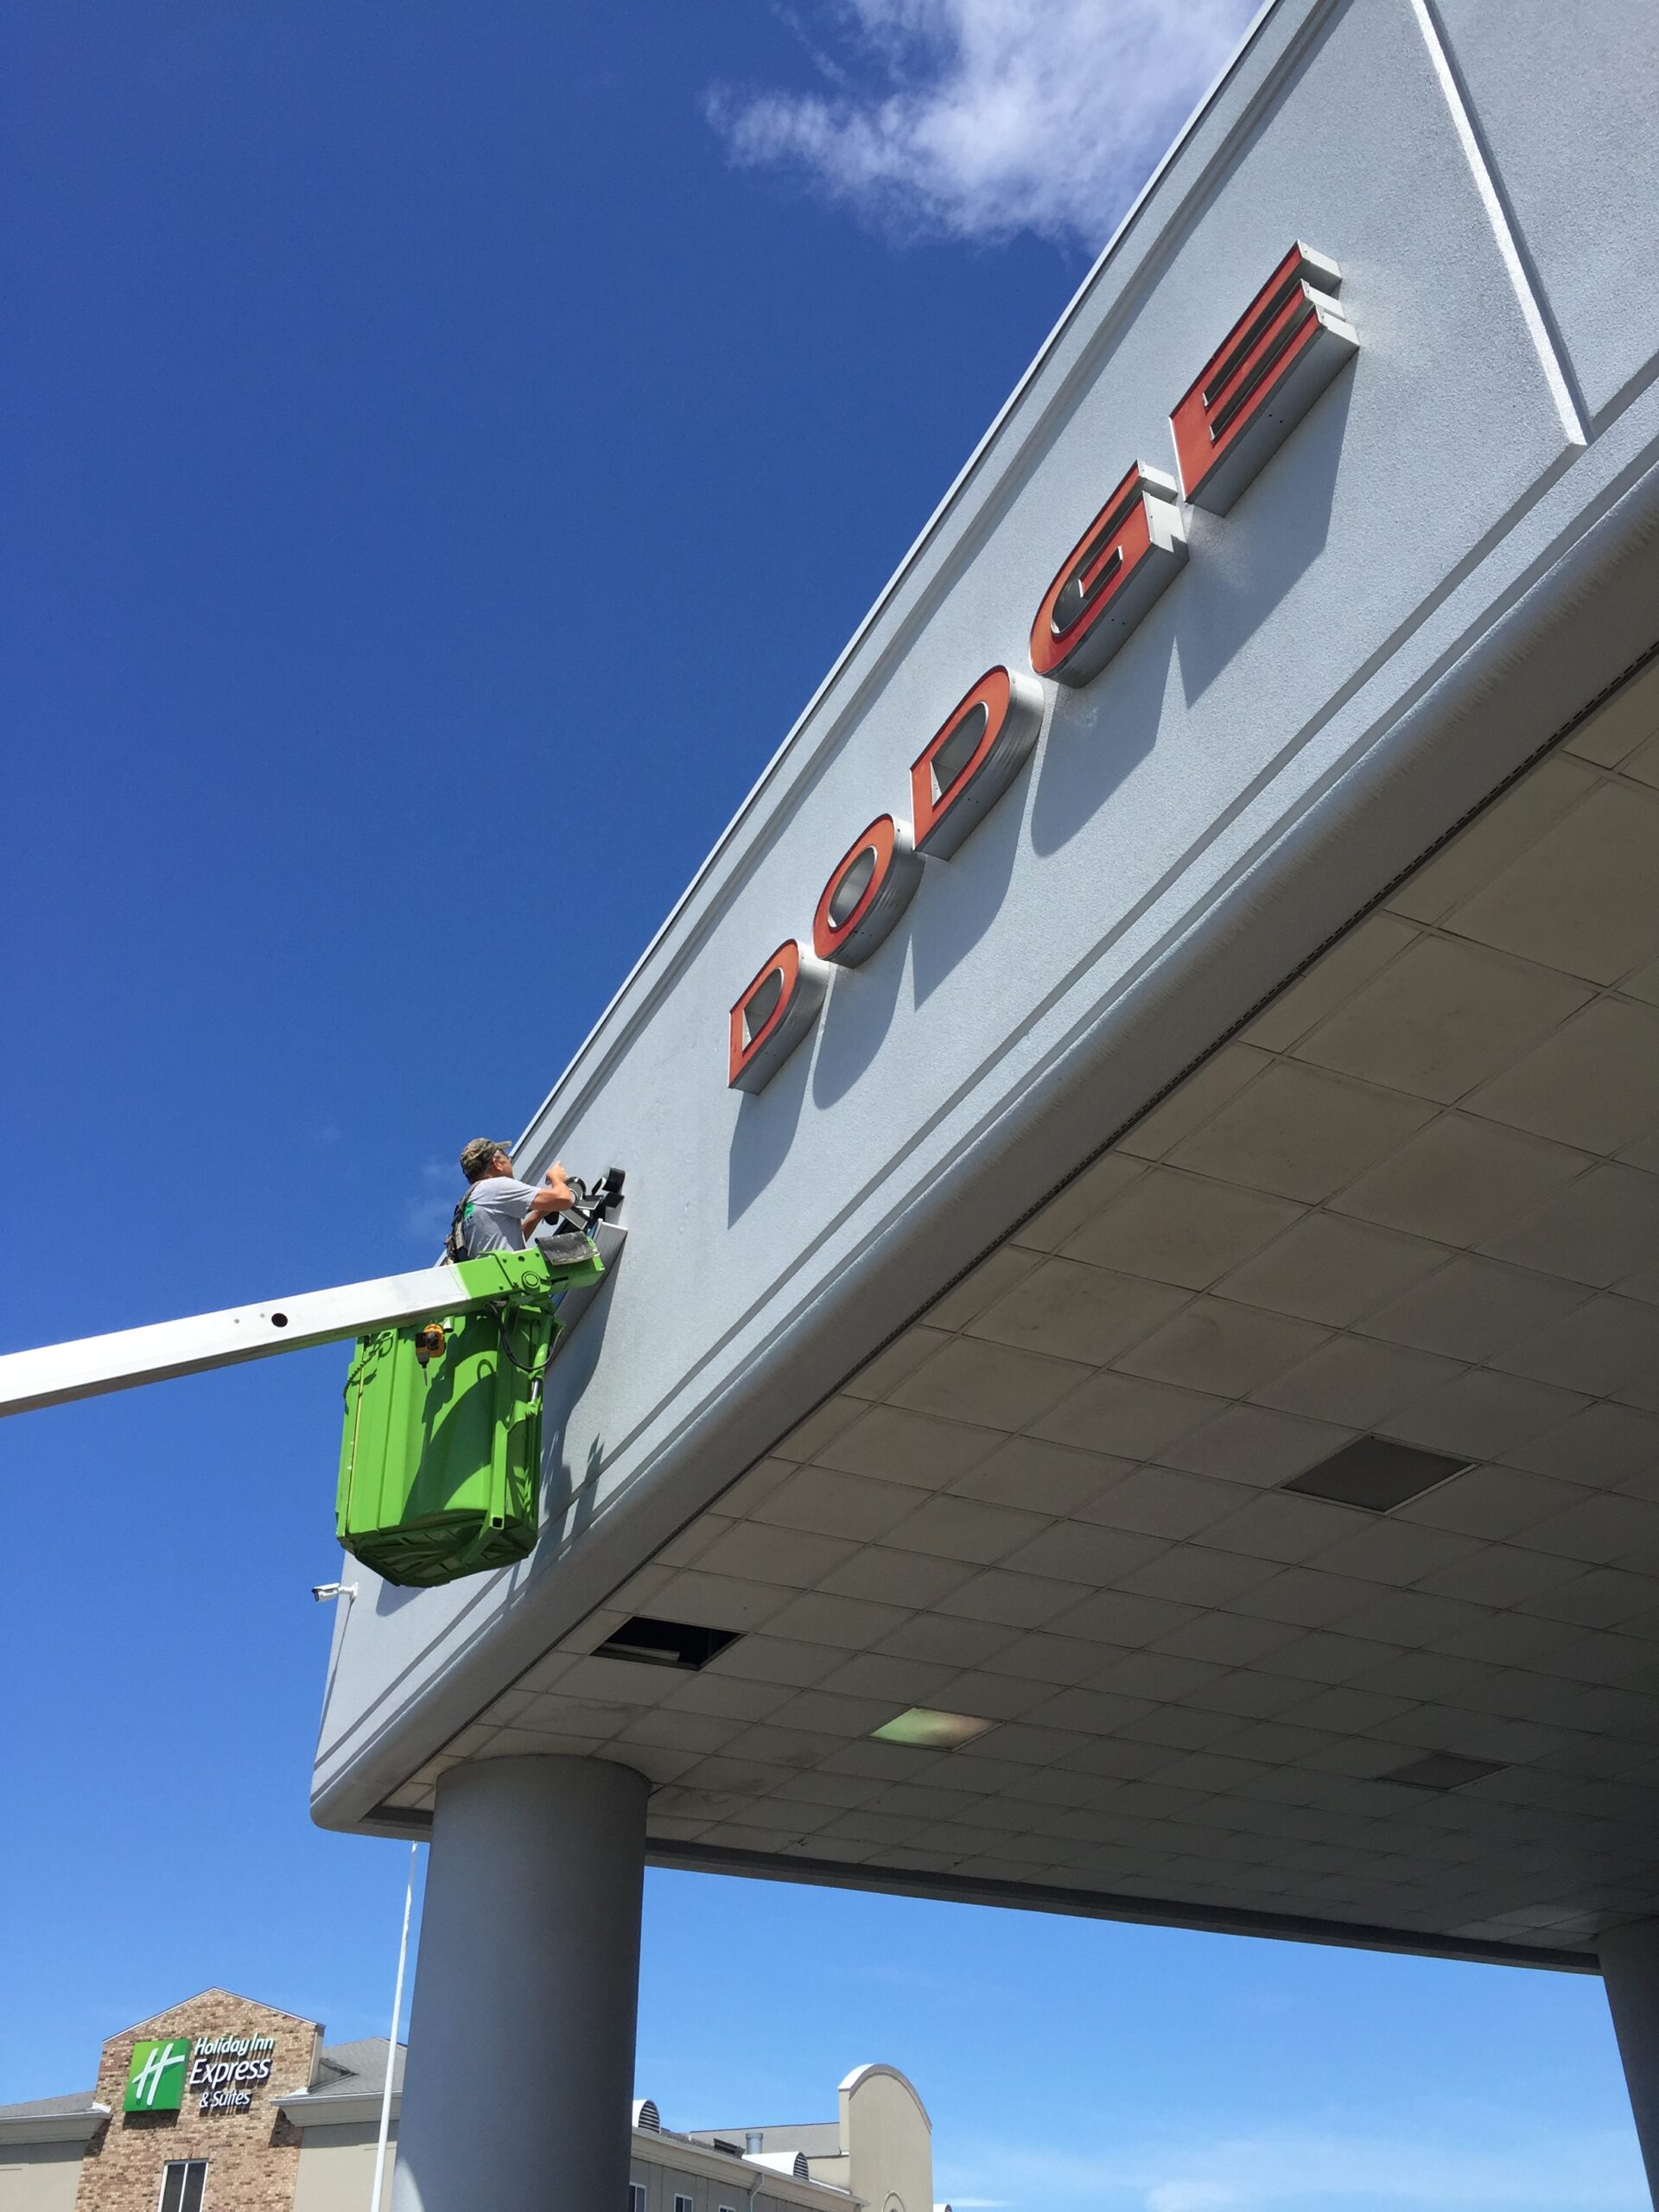 Musson Patout New Iberia Automotive Dealership Sign, Channel Letter, LED Lighting, HLA Signs